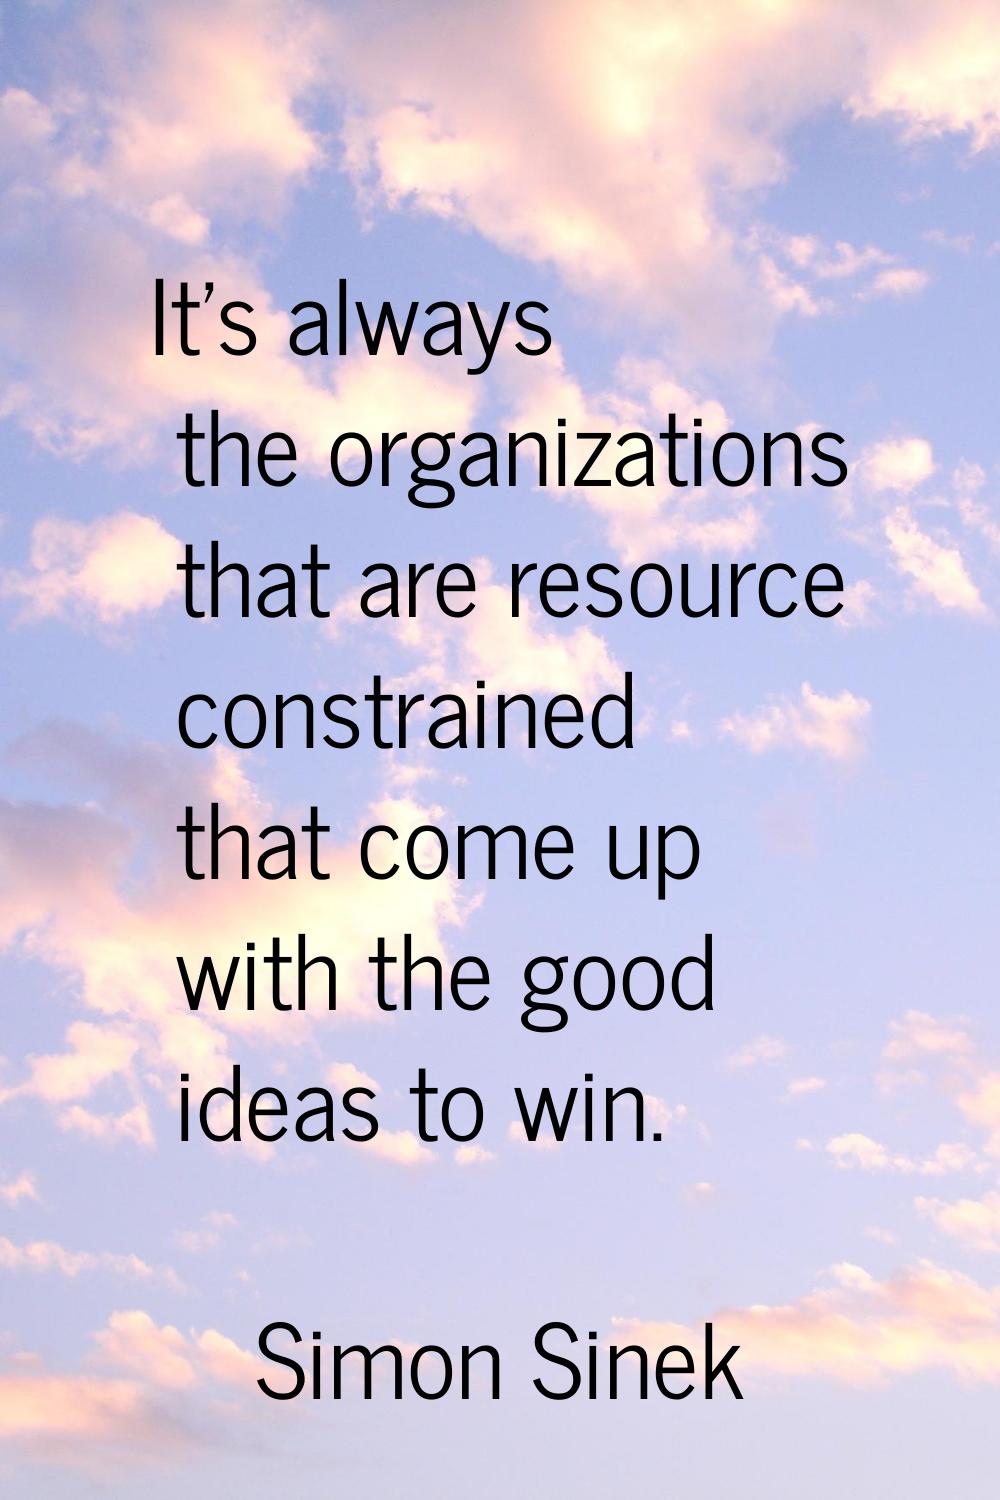 It's always the organizations that are resource constrained that come up with the good ideas to win